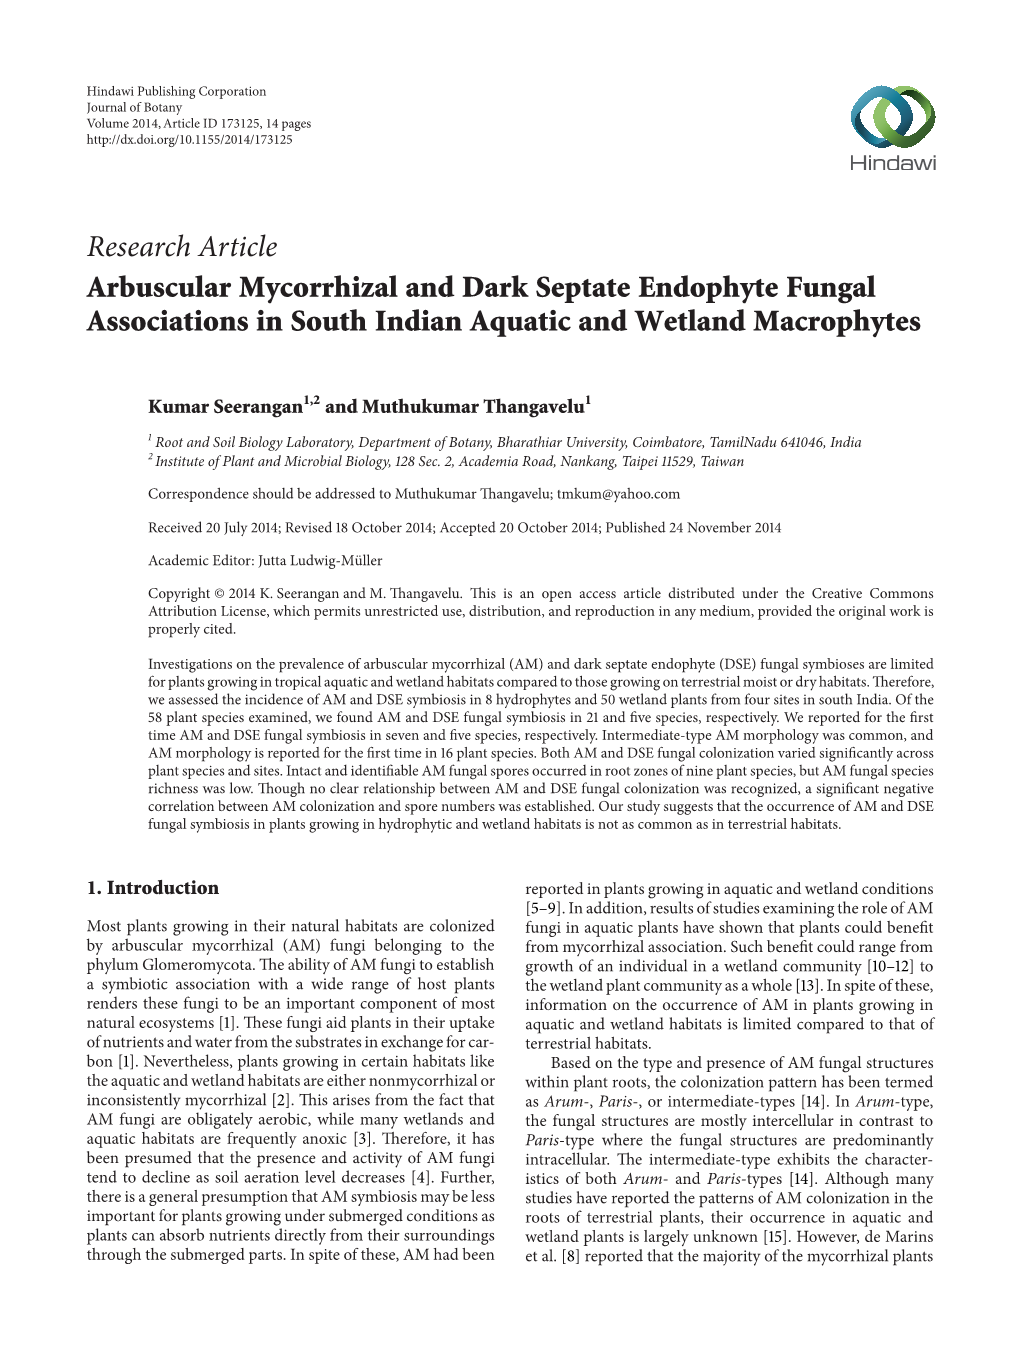 Arbuscular Mycorrhizal and Dark Septate Endophyte Fungal Associations in South Indian Aquatic and Wetland Macrophytes